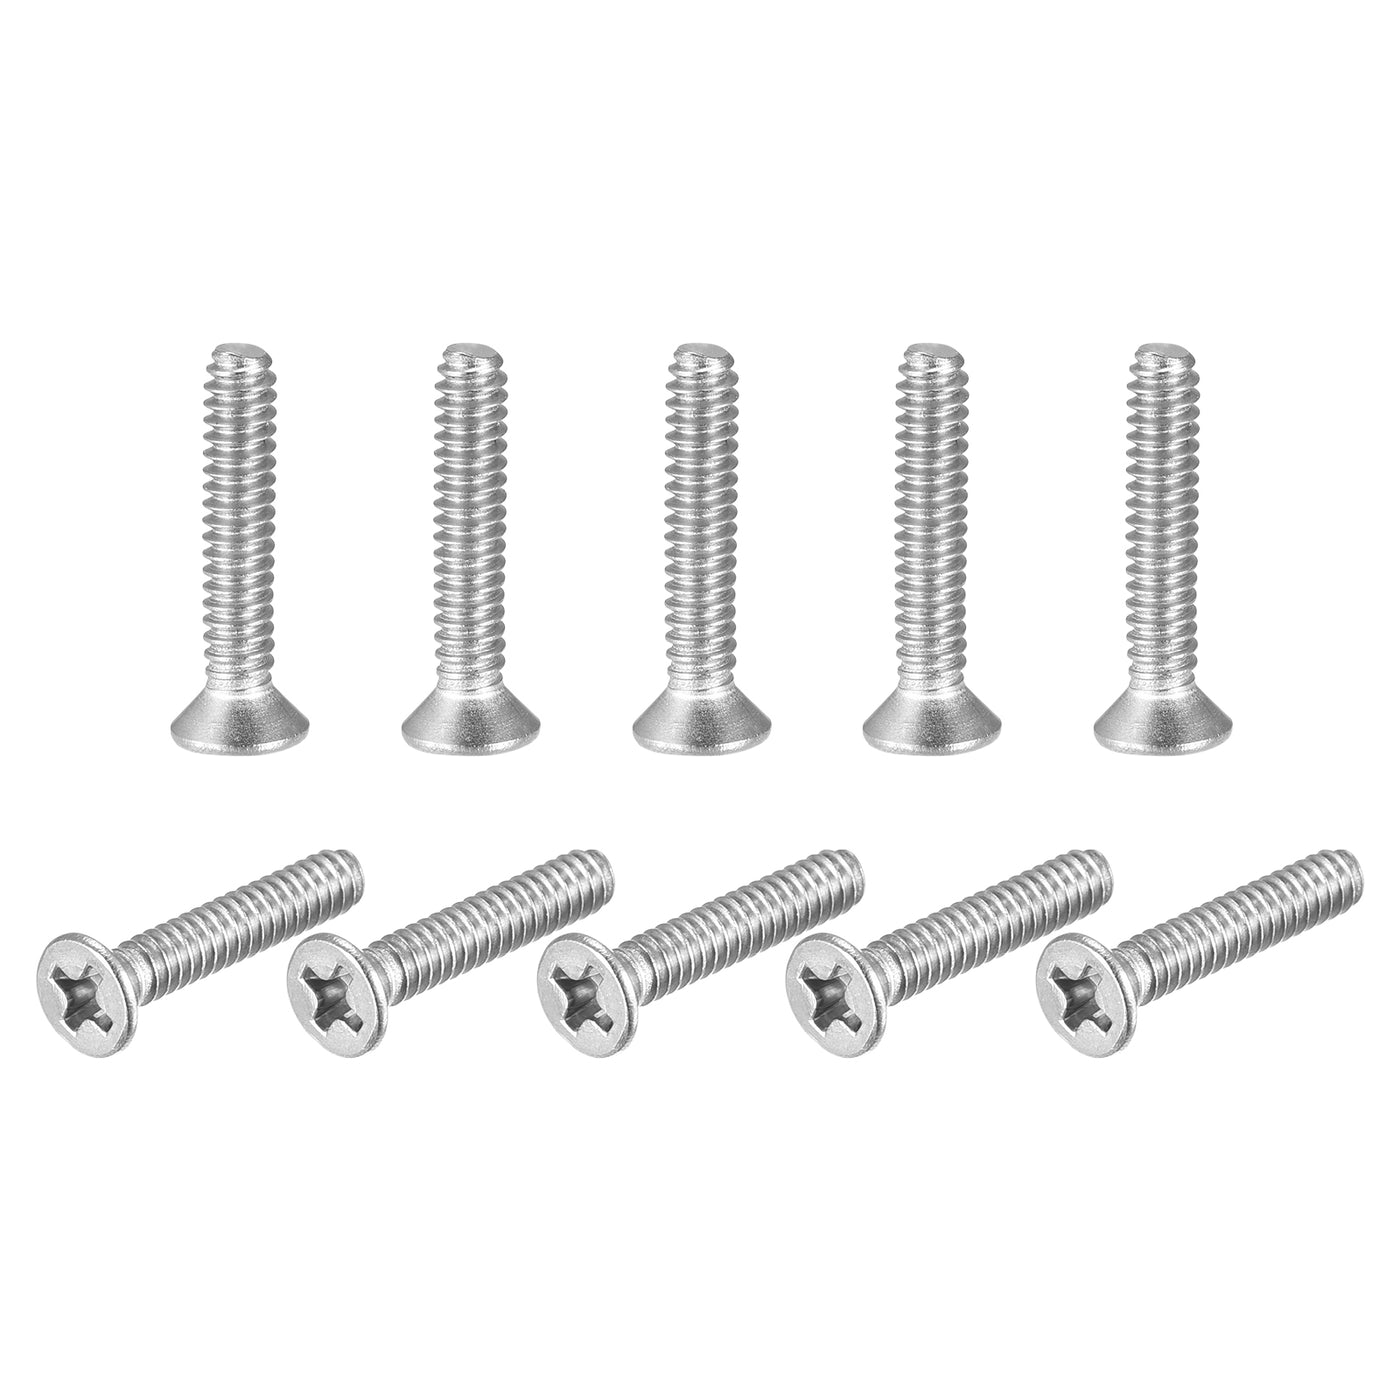 Uxcell Uxcell 8#-32x5/8" Flat Head Machine Screws Phillips 304 Stainless Steel Bolts 50pcs